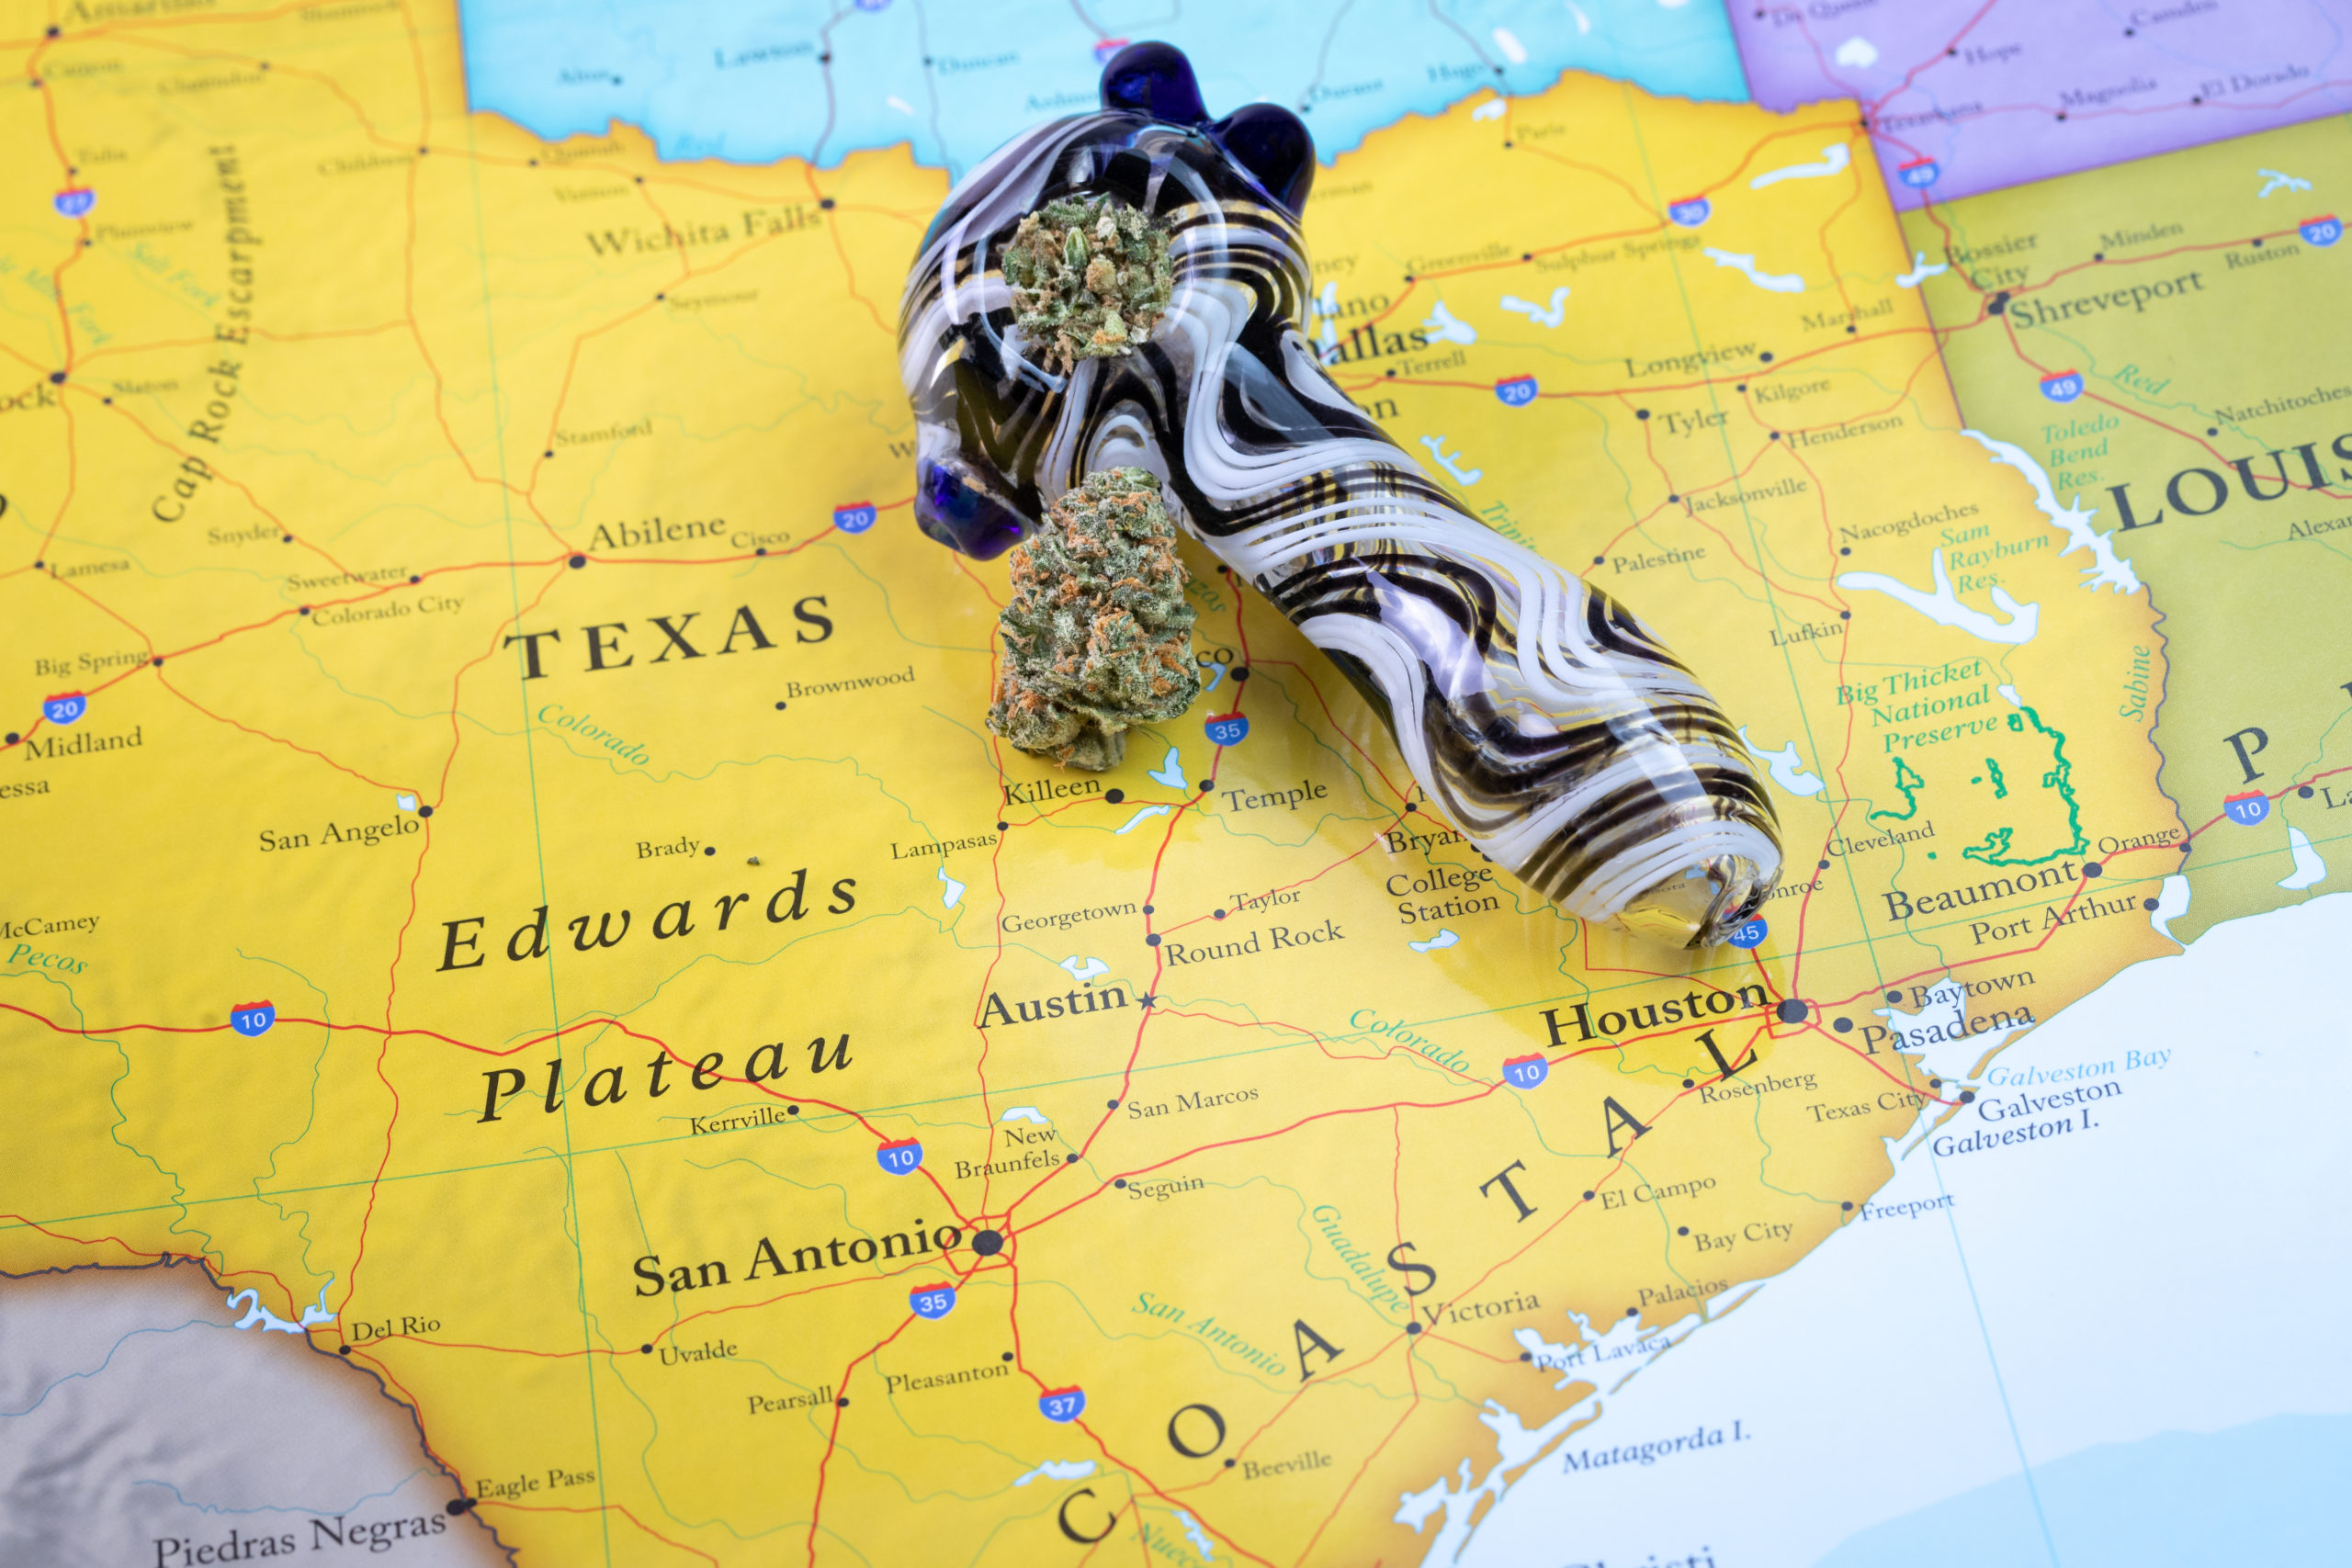 Texas Lawmaker Makes Push For Statewide Cannabis Legalization